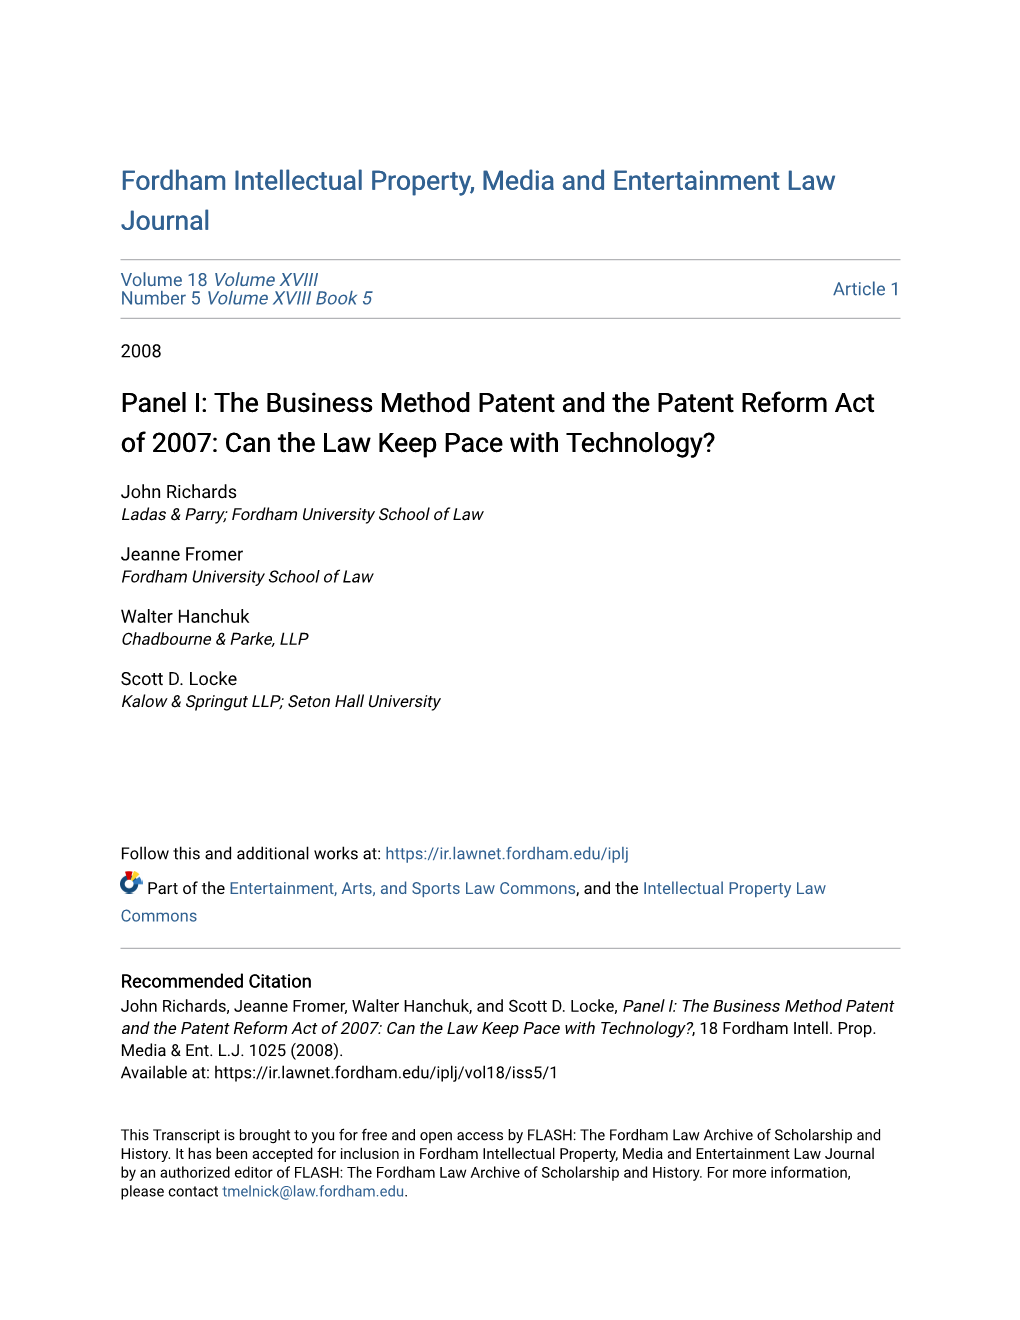 Panel I: the Business Method Patent and the Patent Reform Act of 2007: Can the Law Keep Pace with Technology?